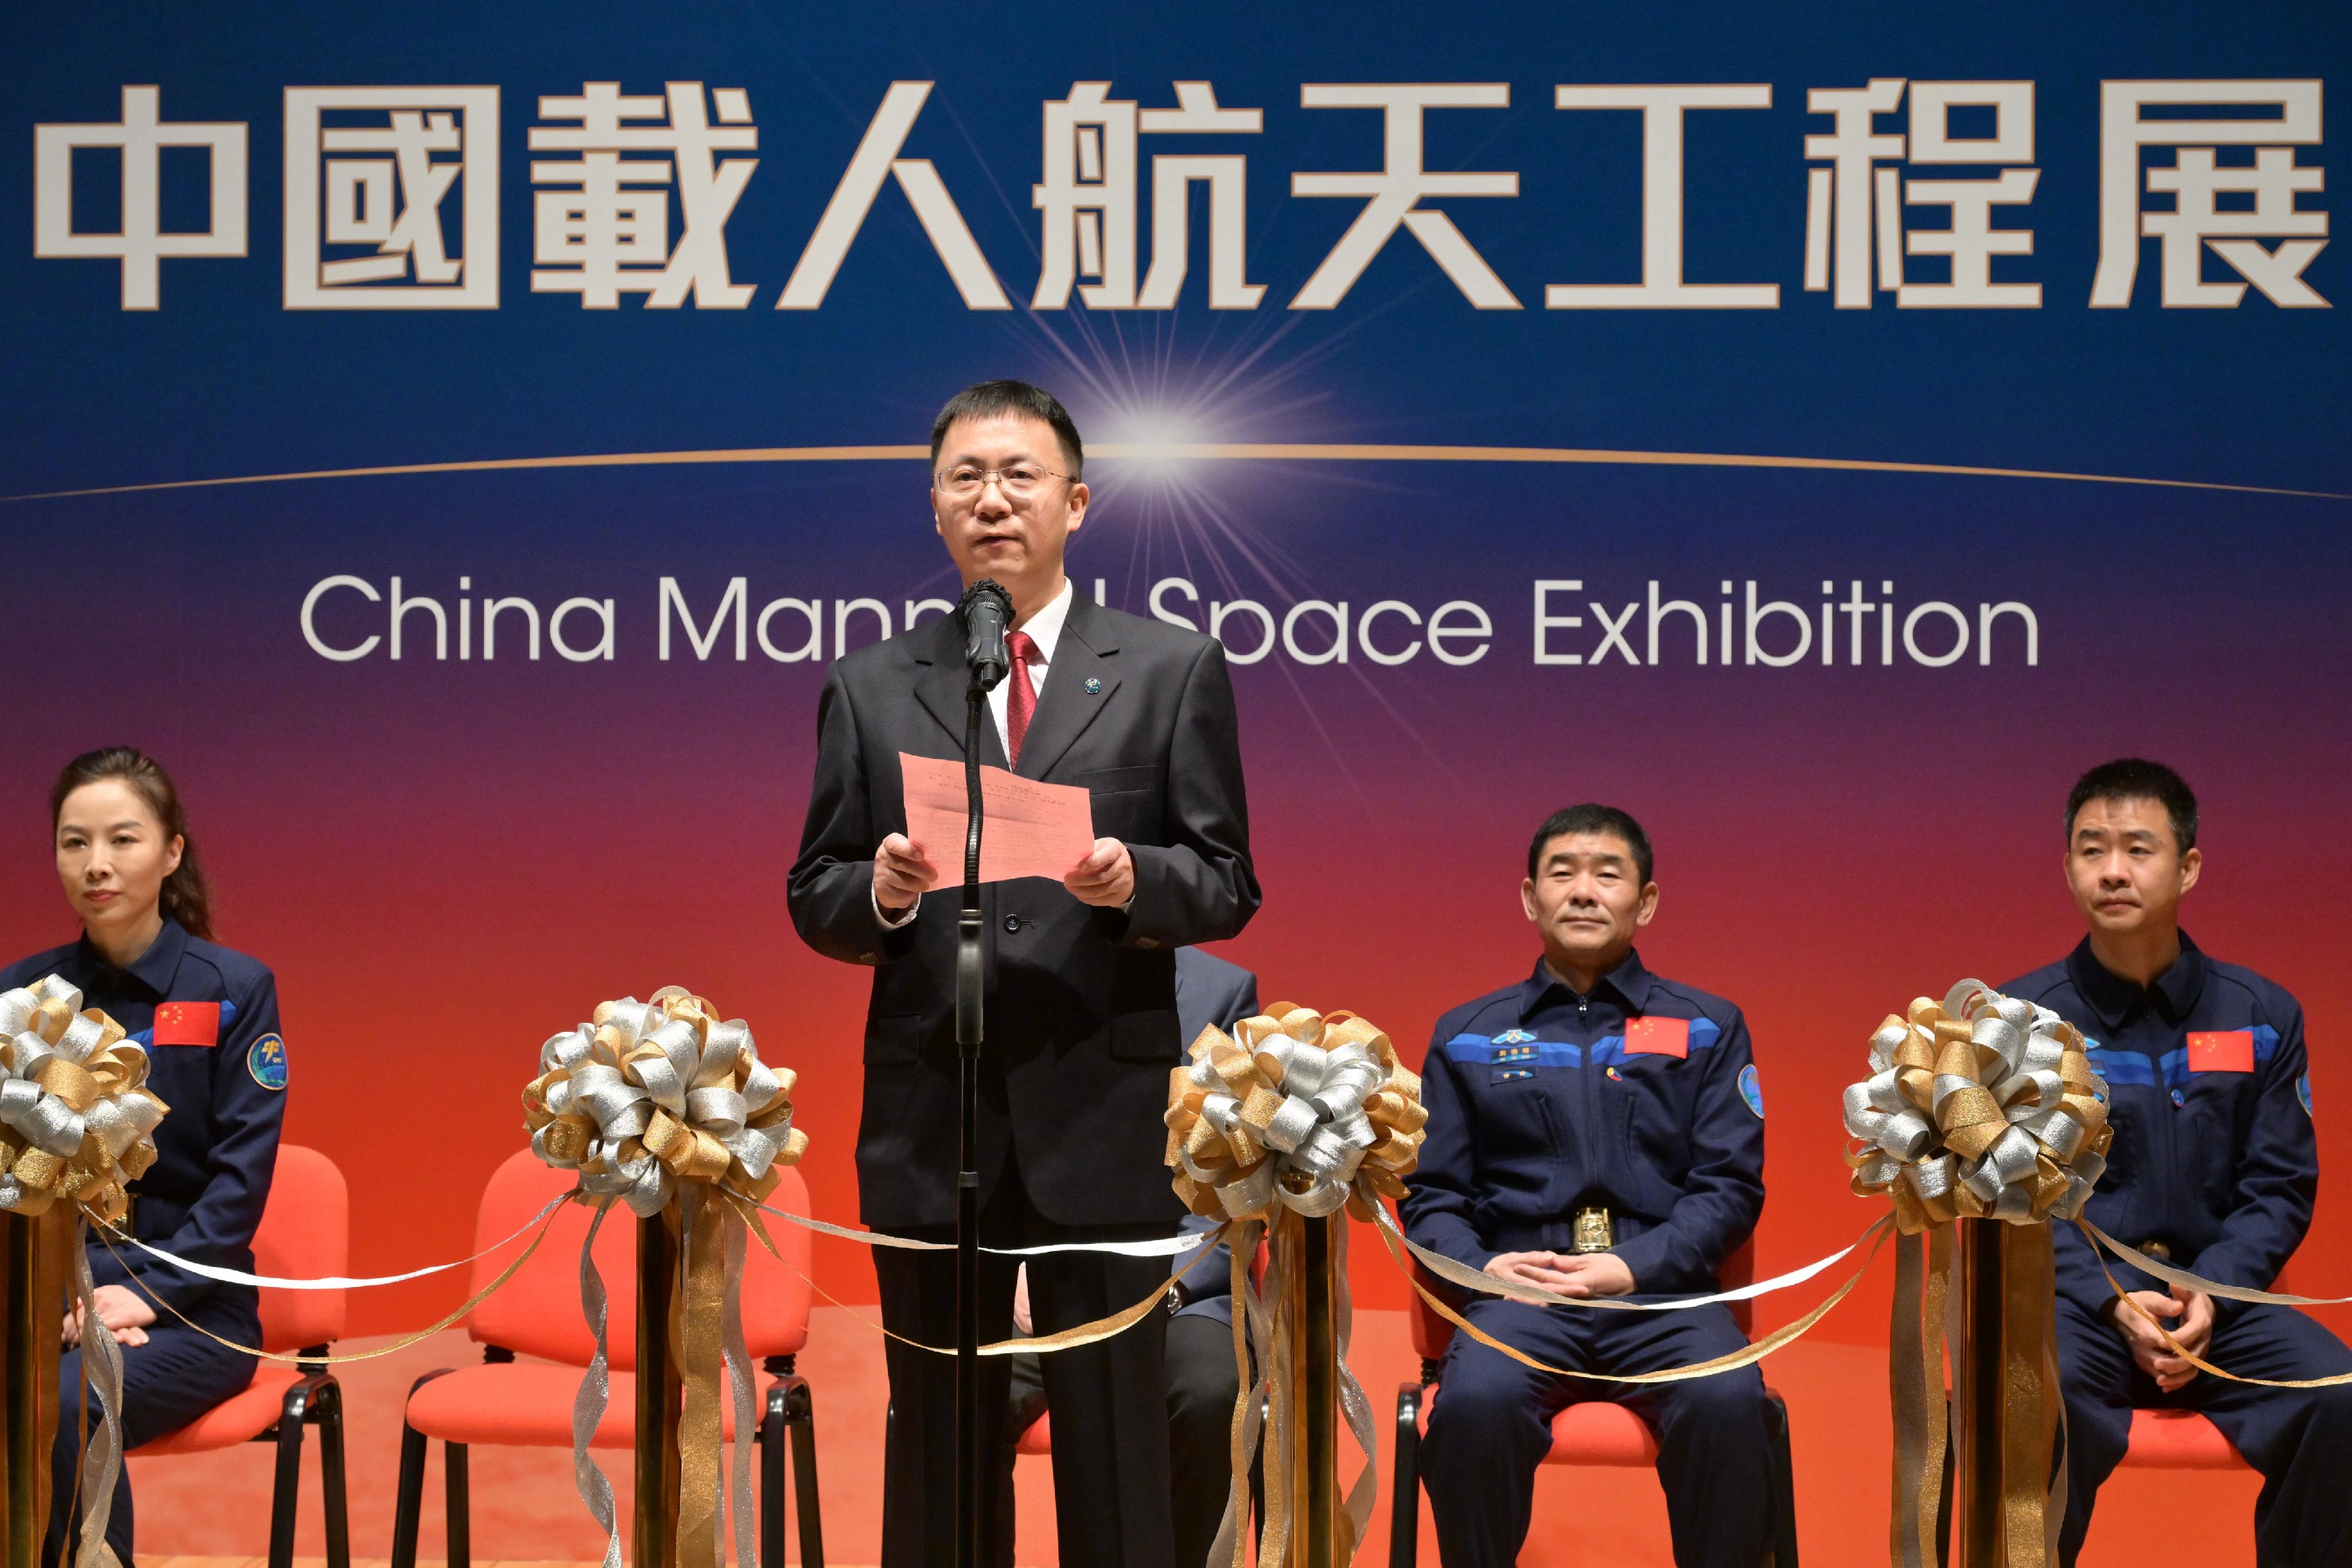 The China Manned Space delegation continued their visit to Hong Kong today (November 30). Photo shows the leader of the delegation and Deputy Director General of the China Manned Space Agency, Mr Lin Xiqiang, speaking at the opening ceremony of the China Manned Space Exhibition.